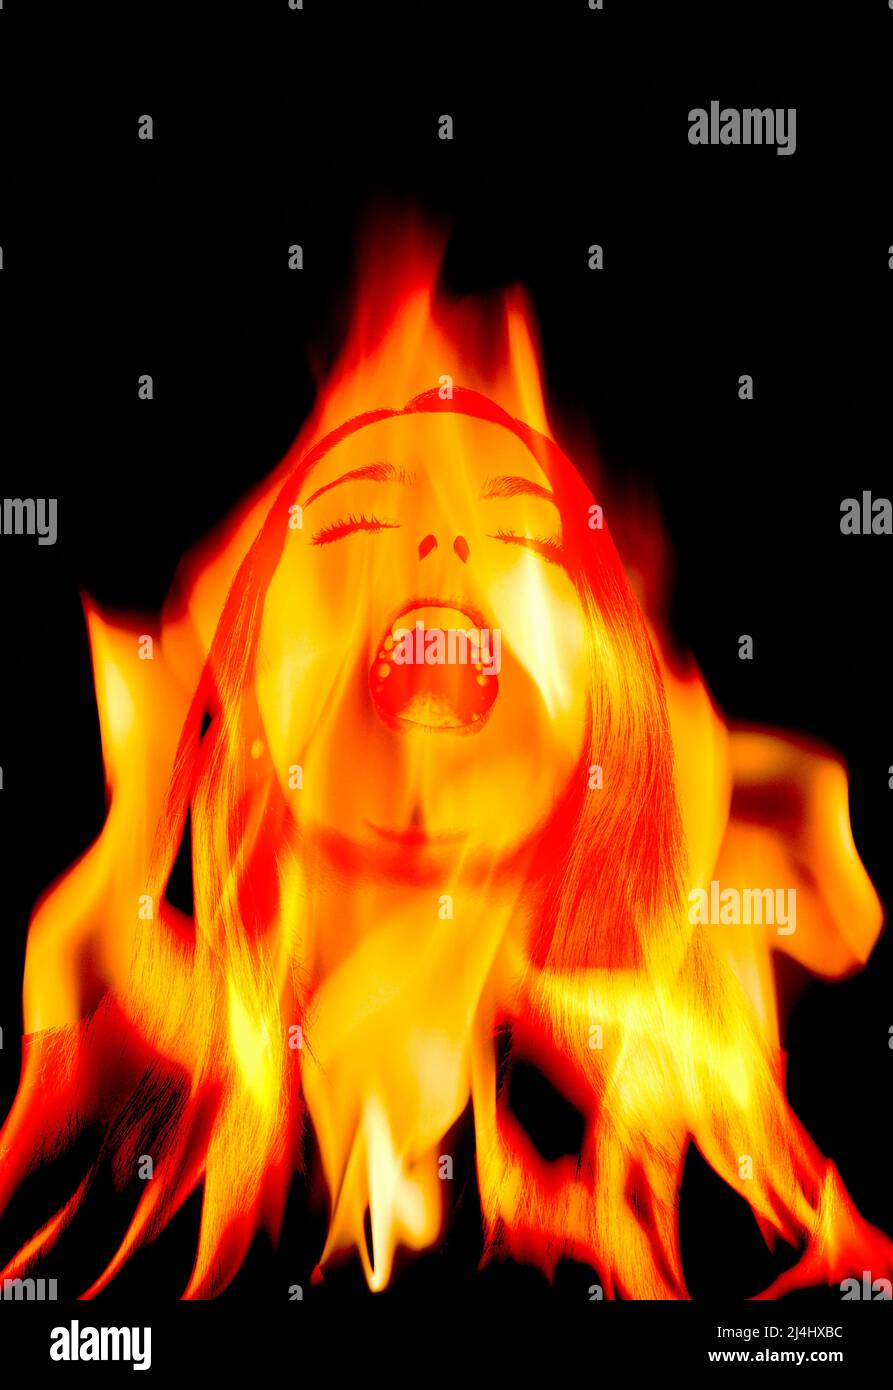 Woman in flames screaming, conceptual image Stock Photo